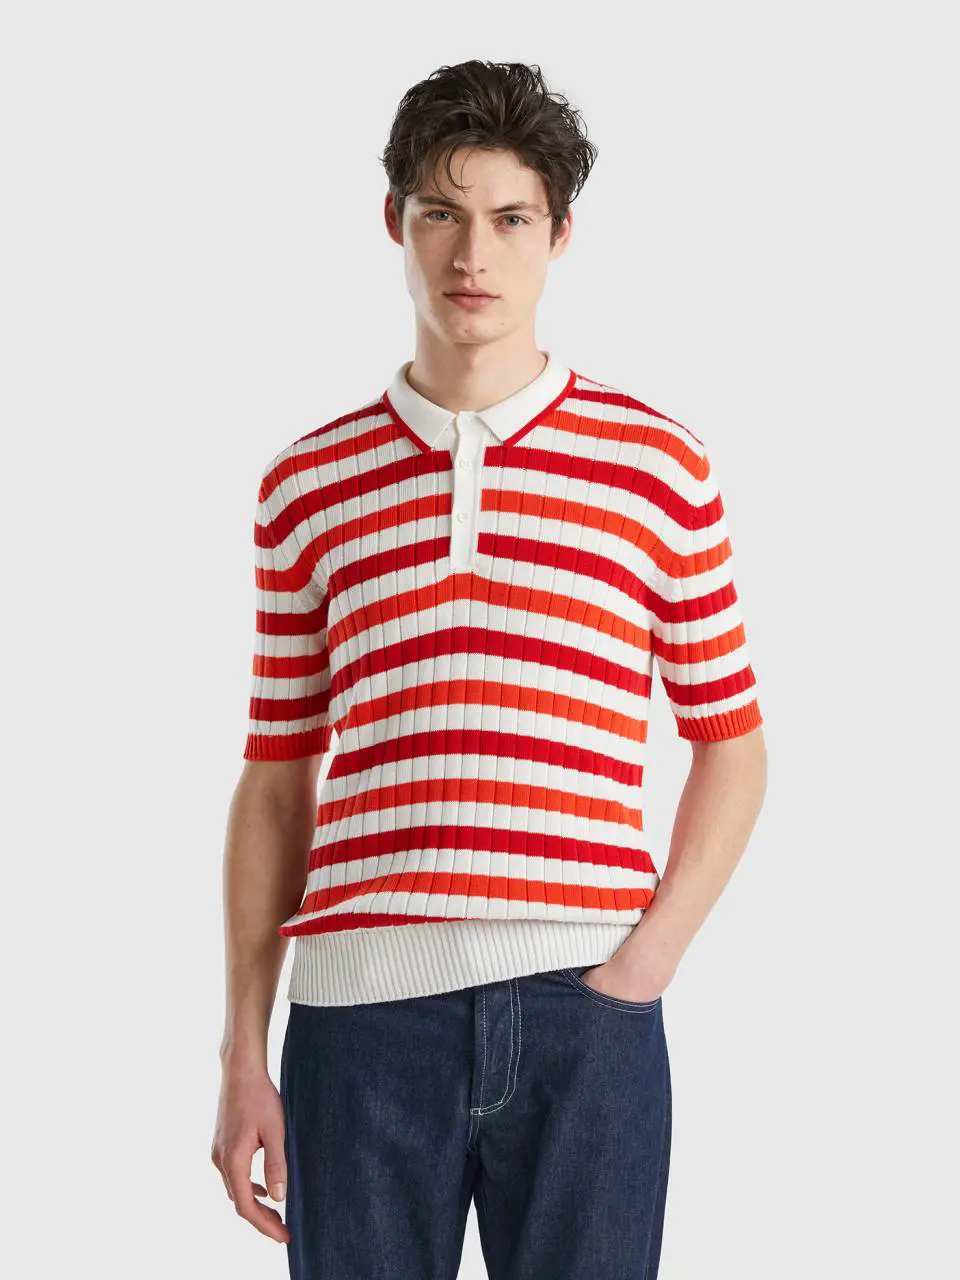 Benetton red and white striped knit polo. 1